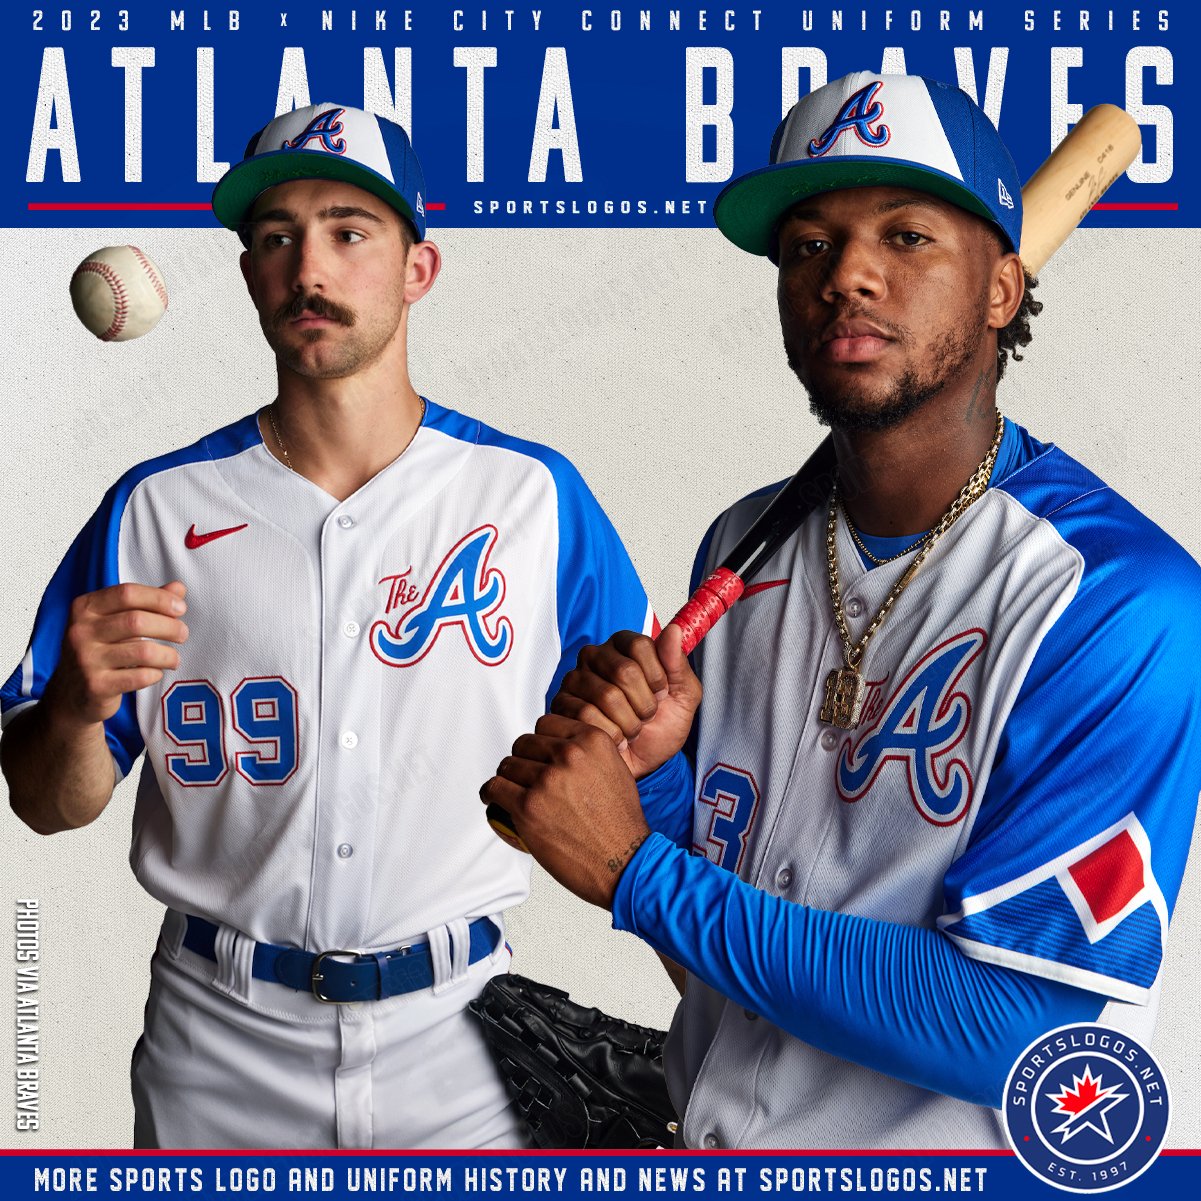 Chris Creamer  SportsLogos.Net on X: For the A and the Hanmer. Atlanta  Braves unveil brand new 2023 Nike MLB City Connect uniforms. #Nike #Braves  #MLB #CityConnect Story, pics, details here